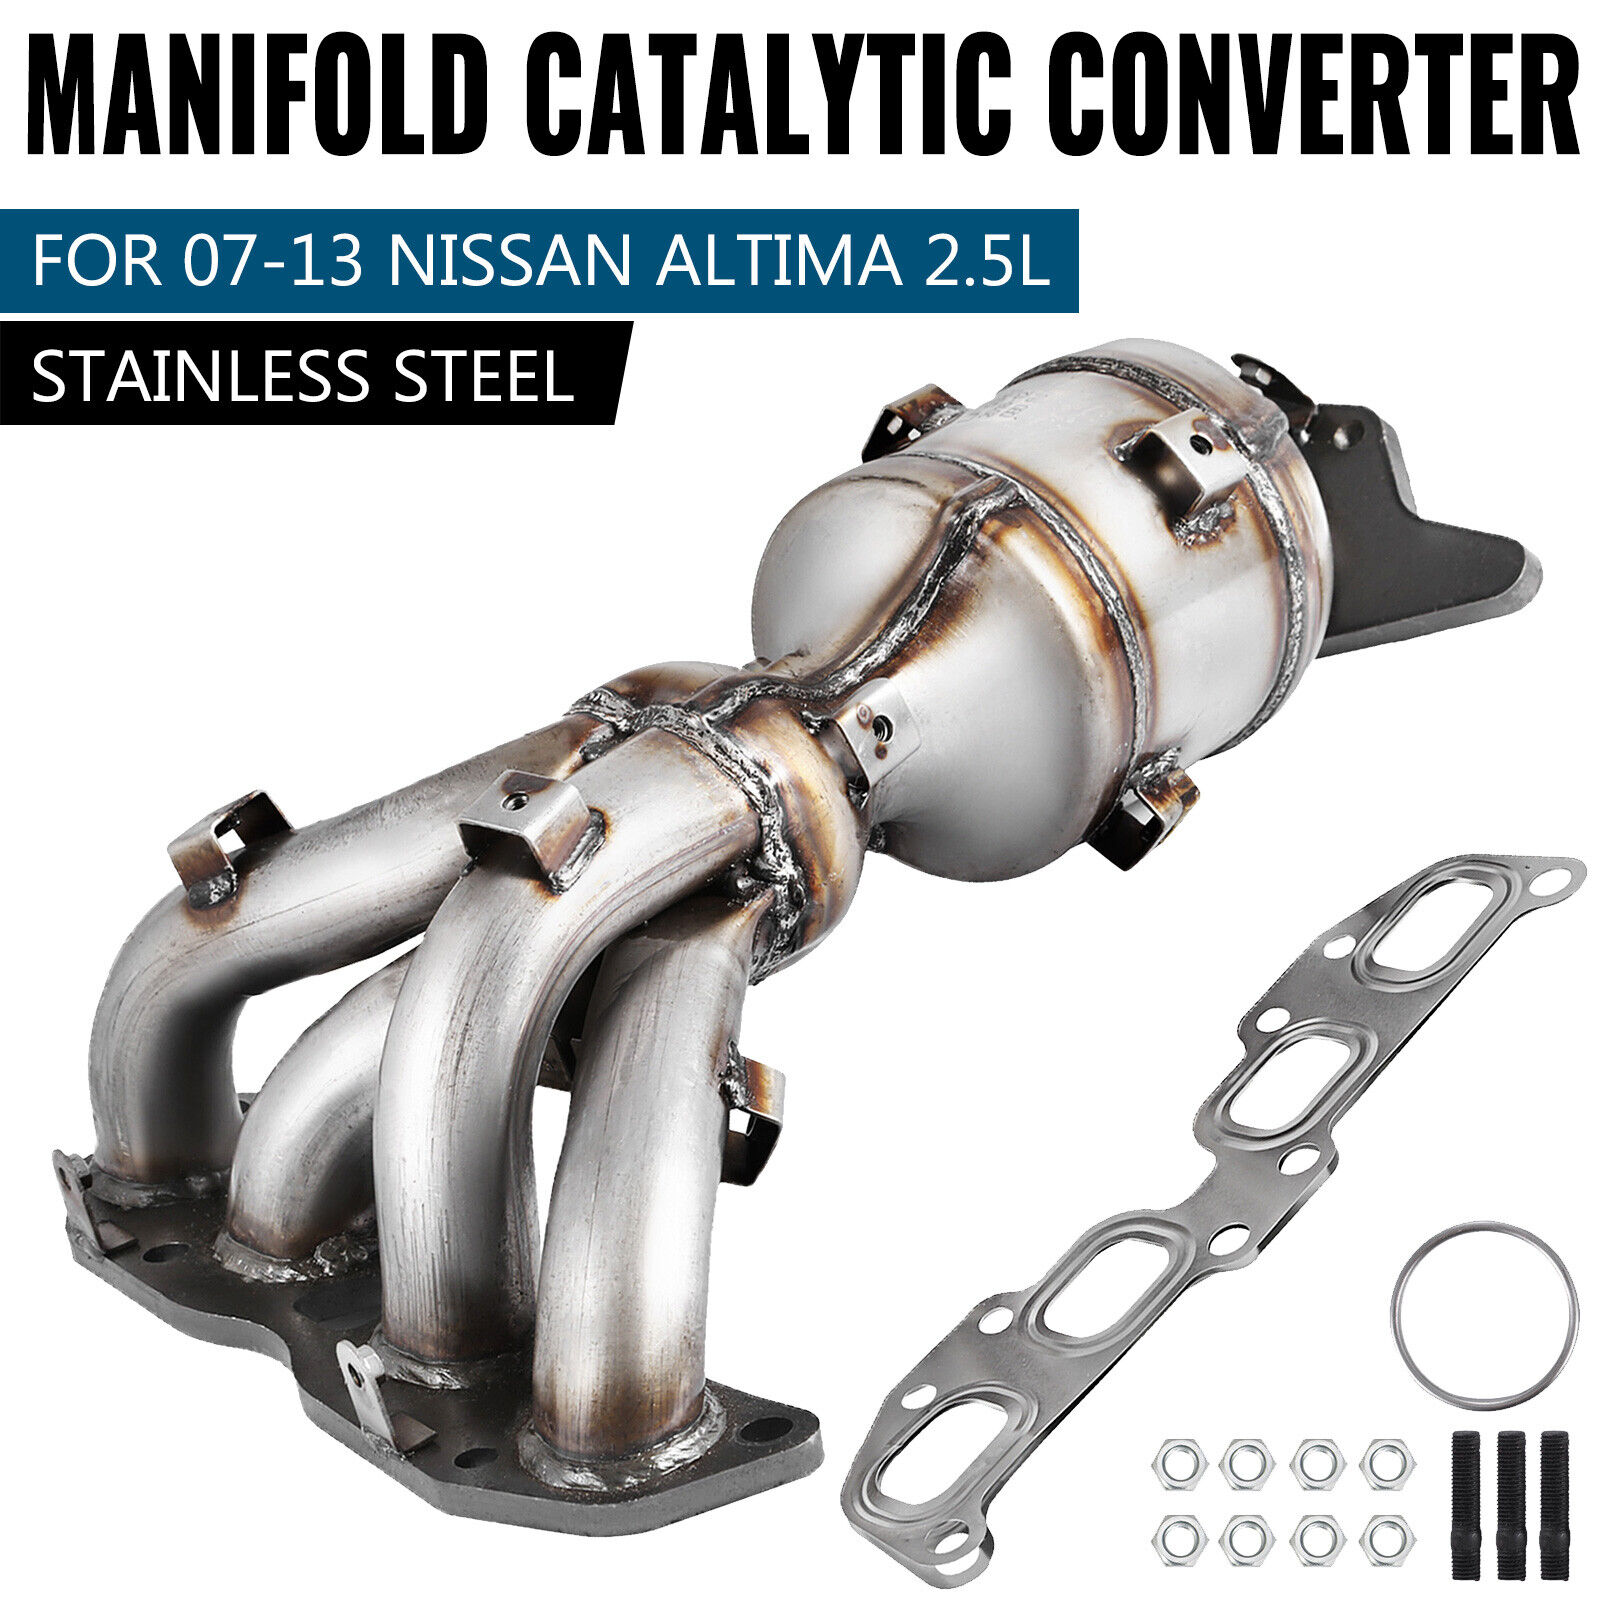 FACTORY STYLE CATALYTIC CONVERTER EXHAUST MANIFOLD FIT 07-12 NISSAN ALTIMA 2.5L